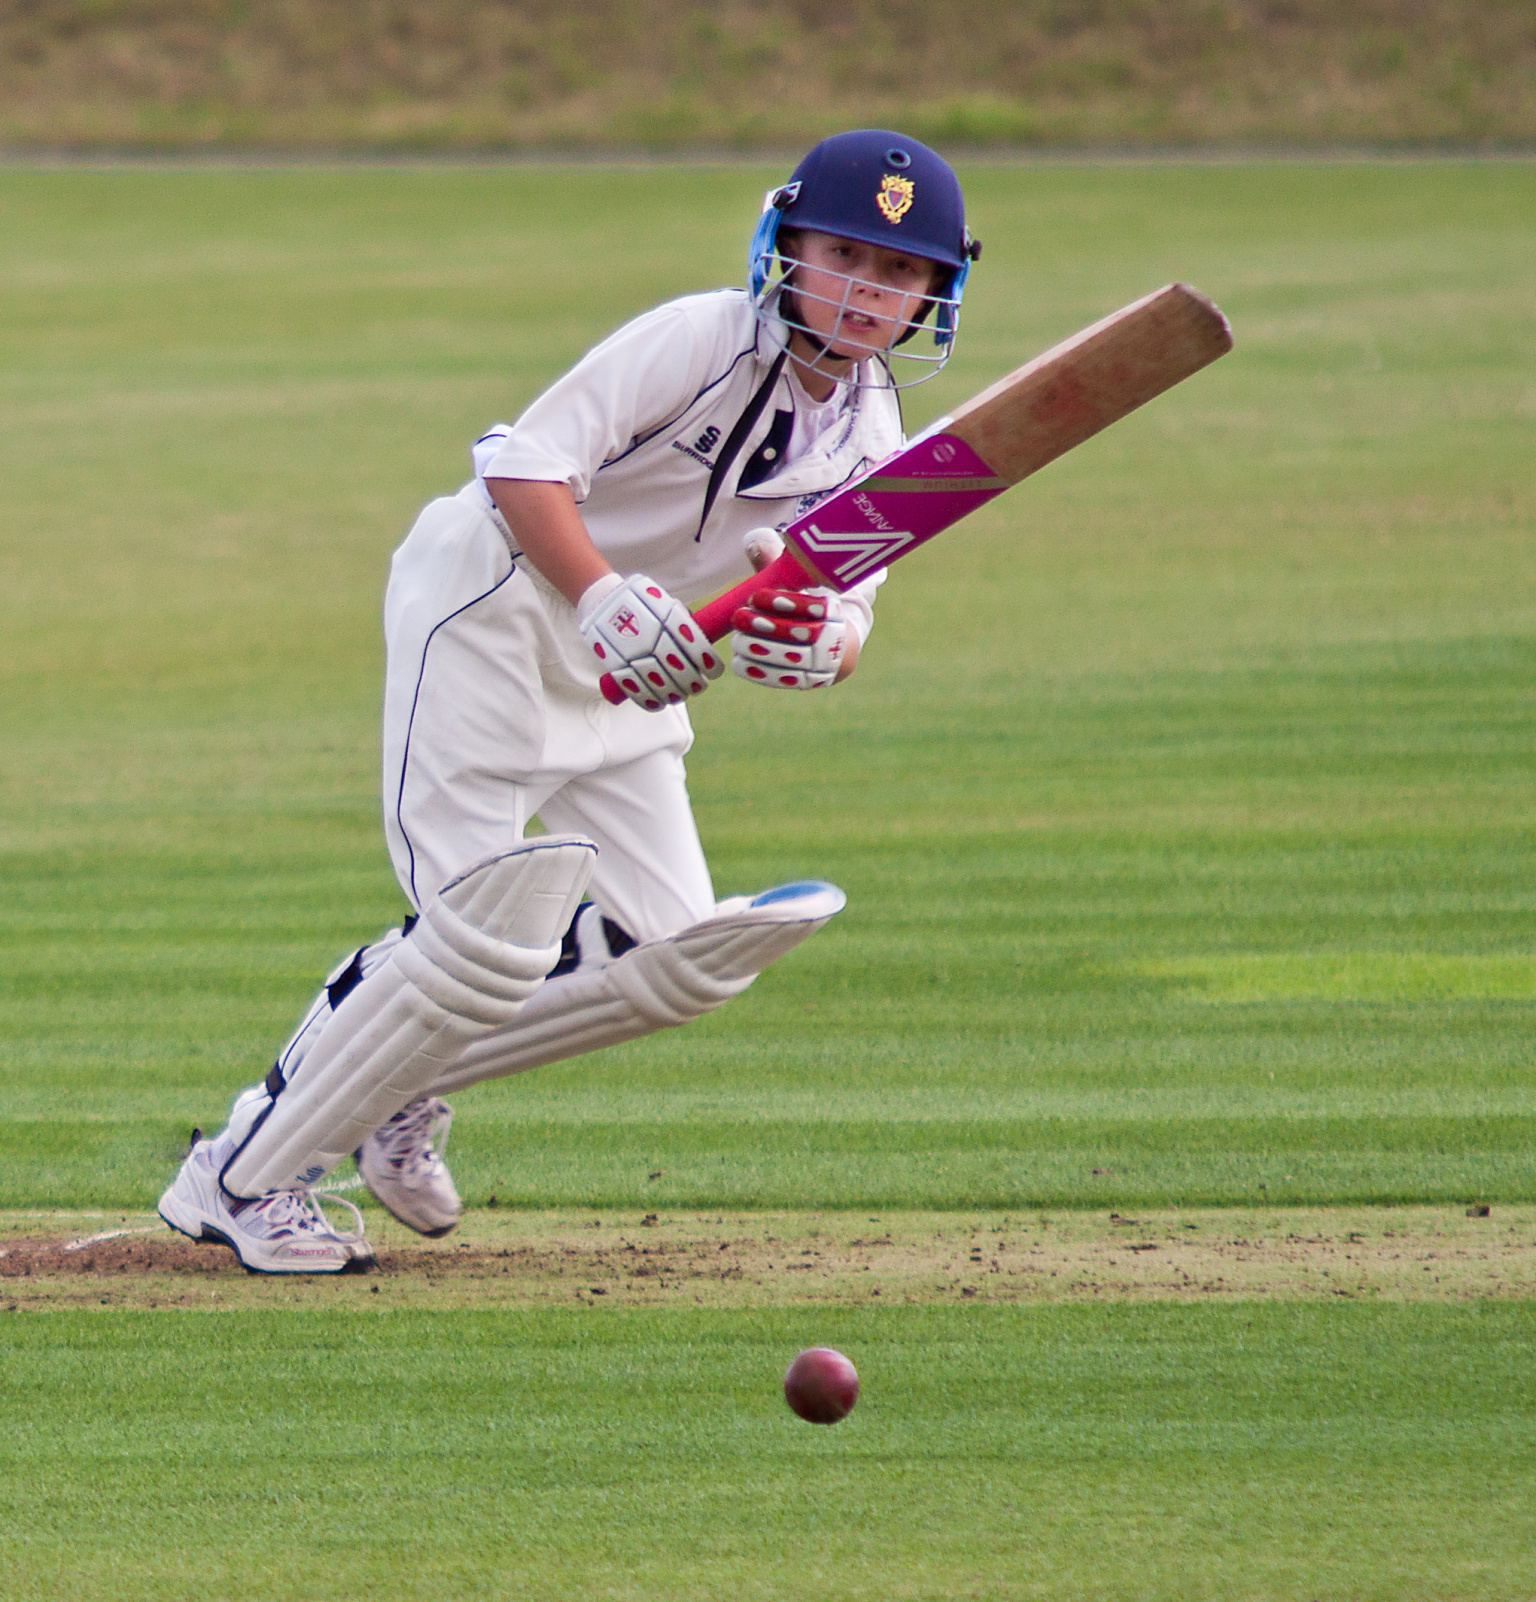 New habits to take for young cricketers